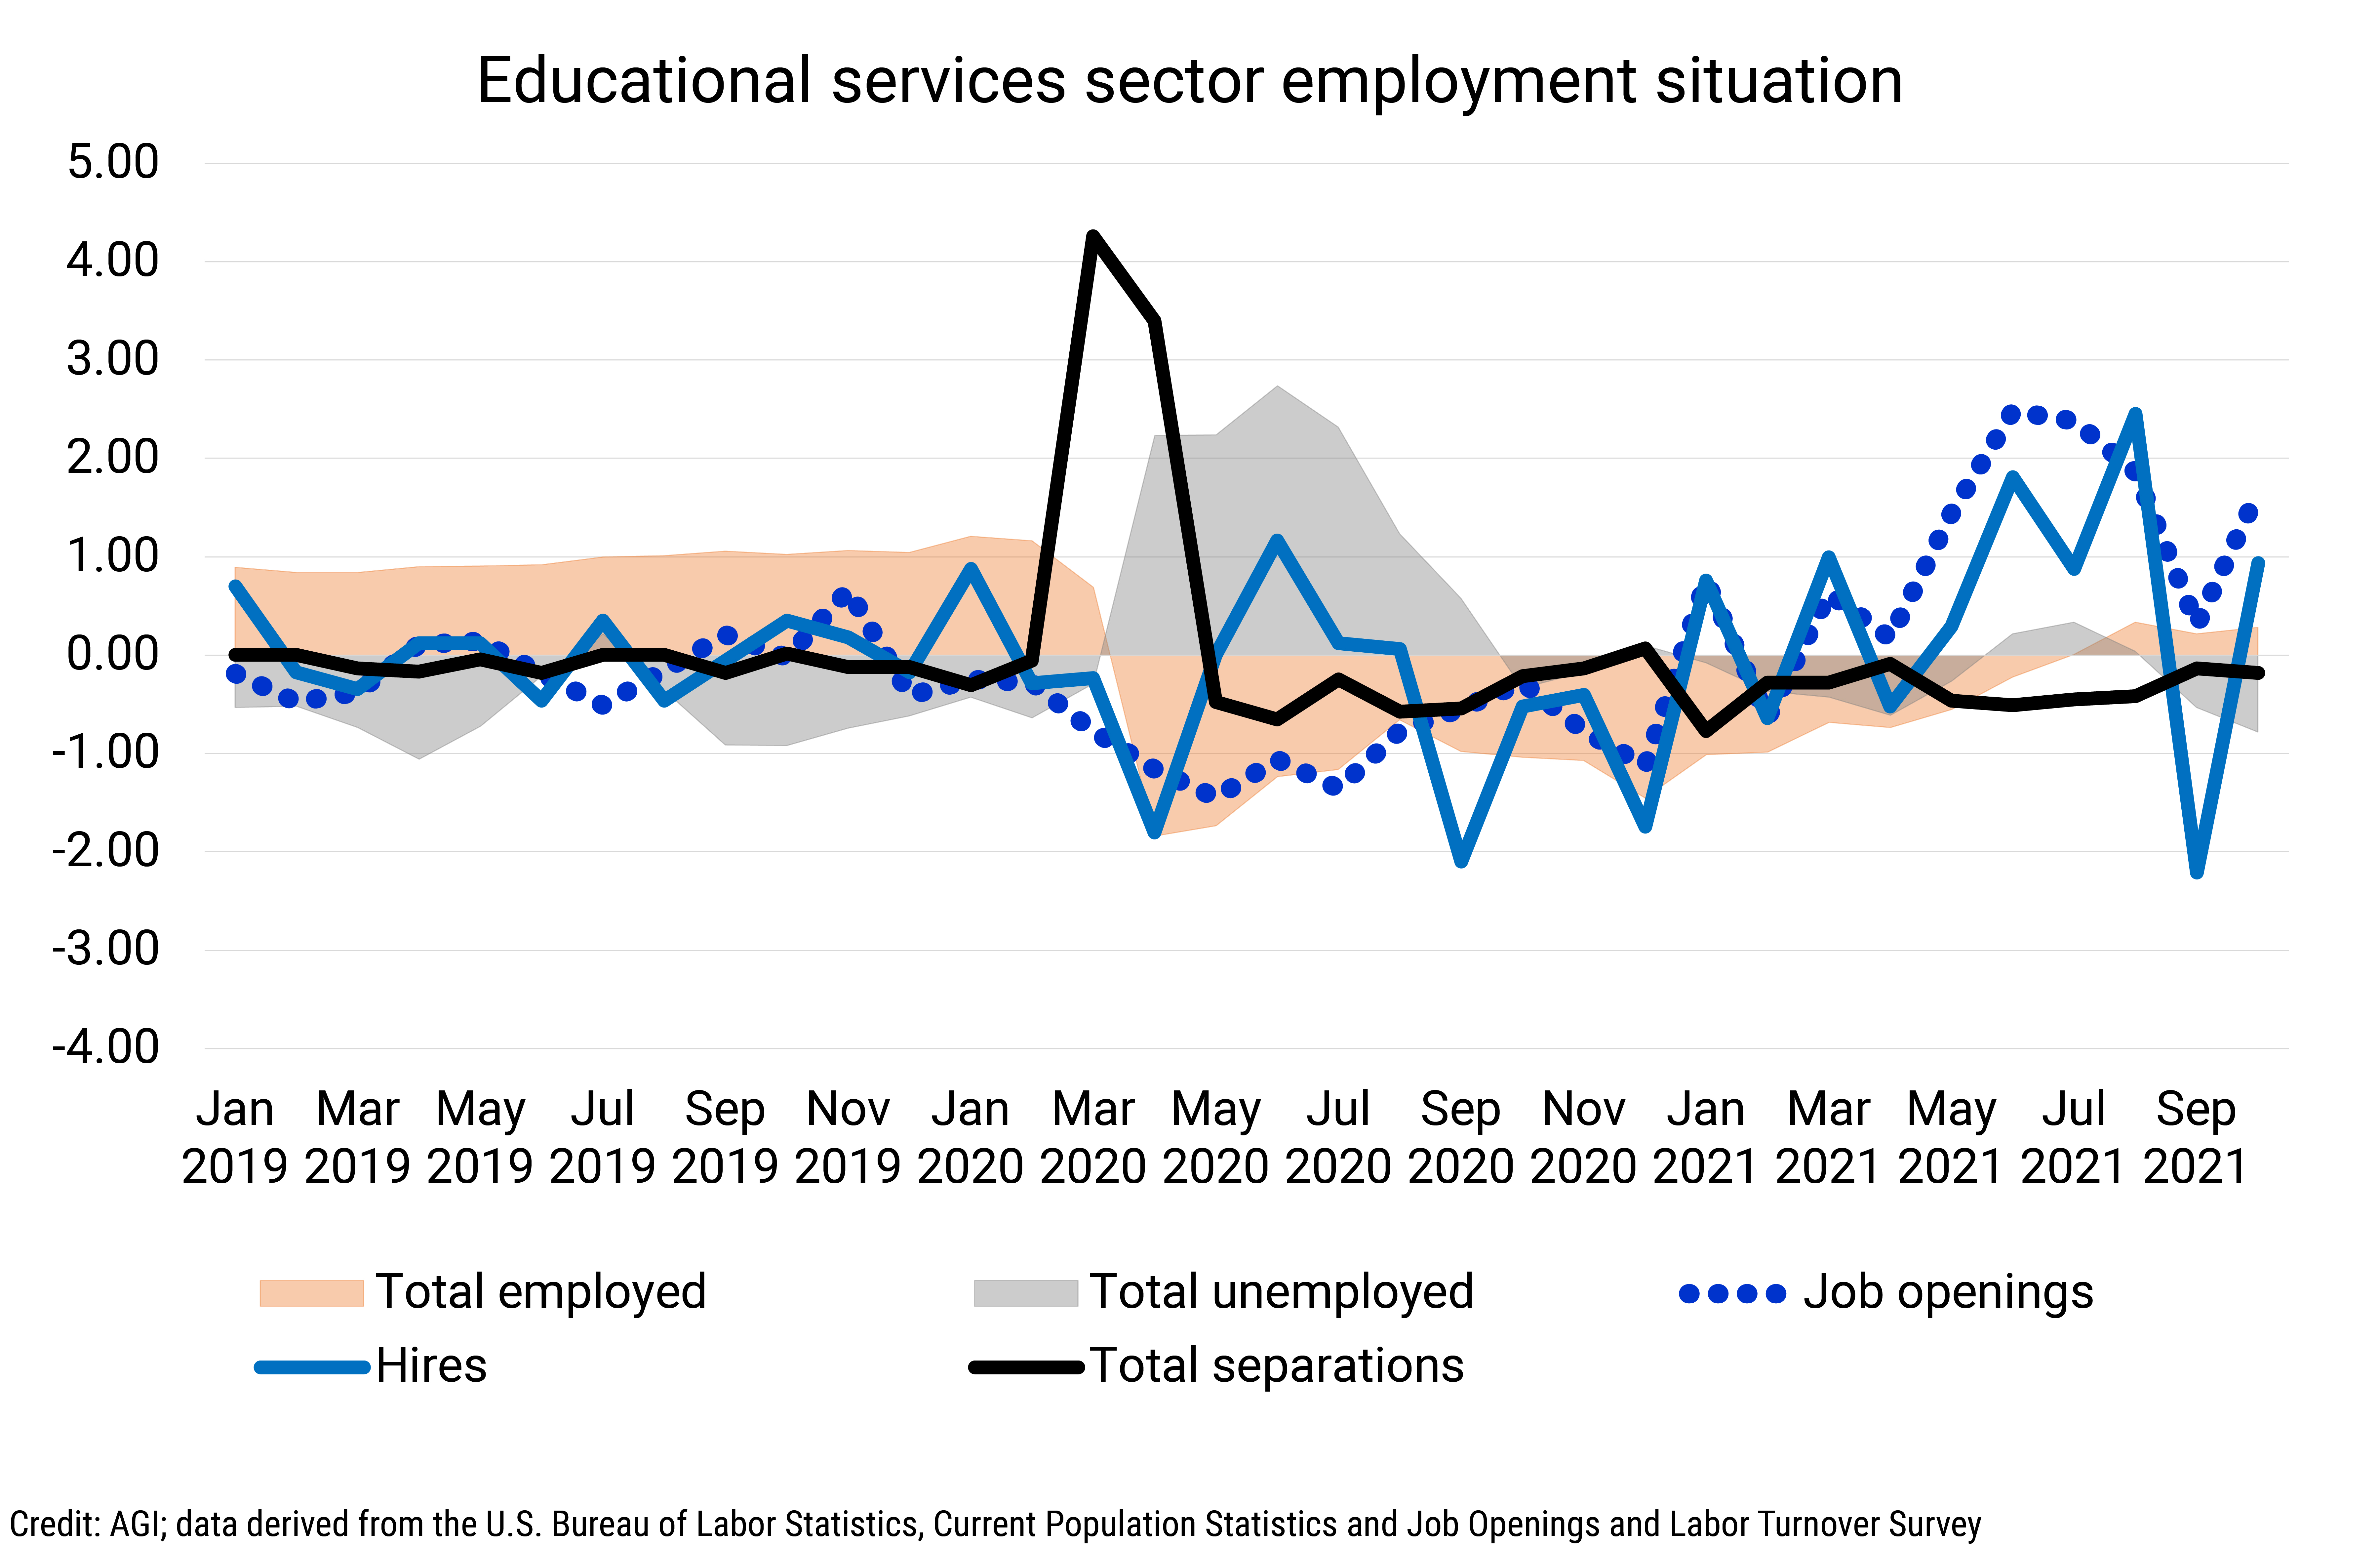 DB_2022-001 chart 09: Educational services sector employment situation (Credit: AGI; data derived from the U.S. Bureau of Labor Statistics, Current Population Statistics and Job Openings and Labor Turnover Survey)